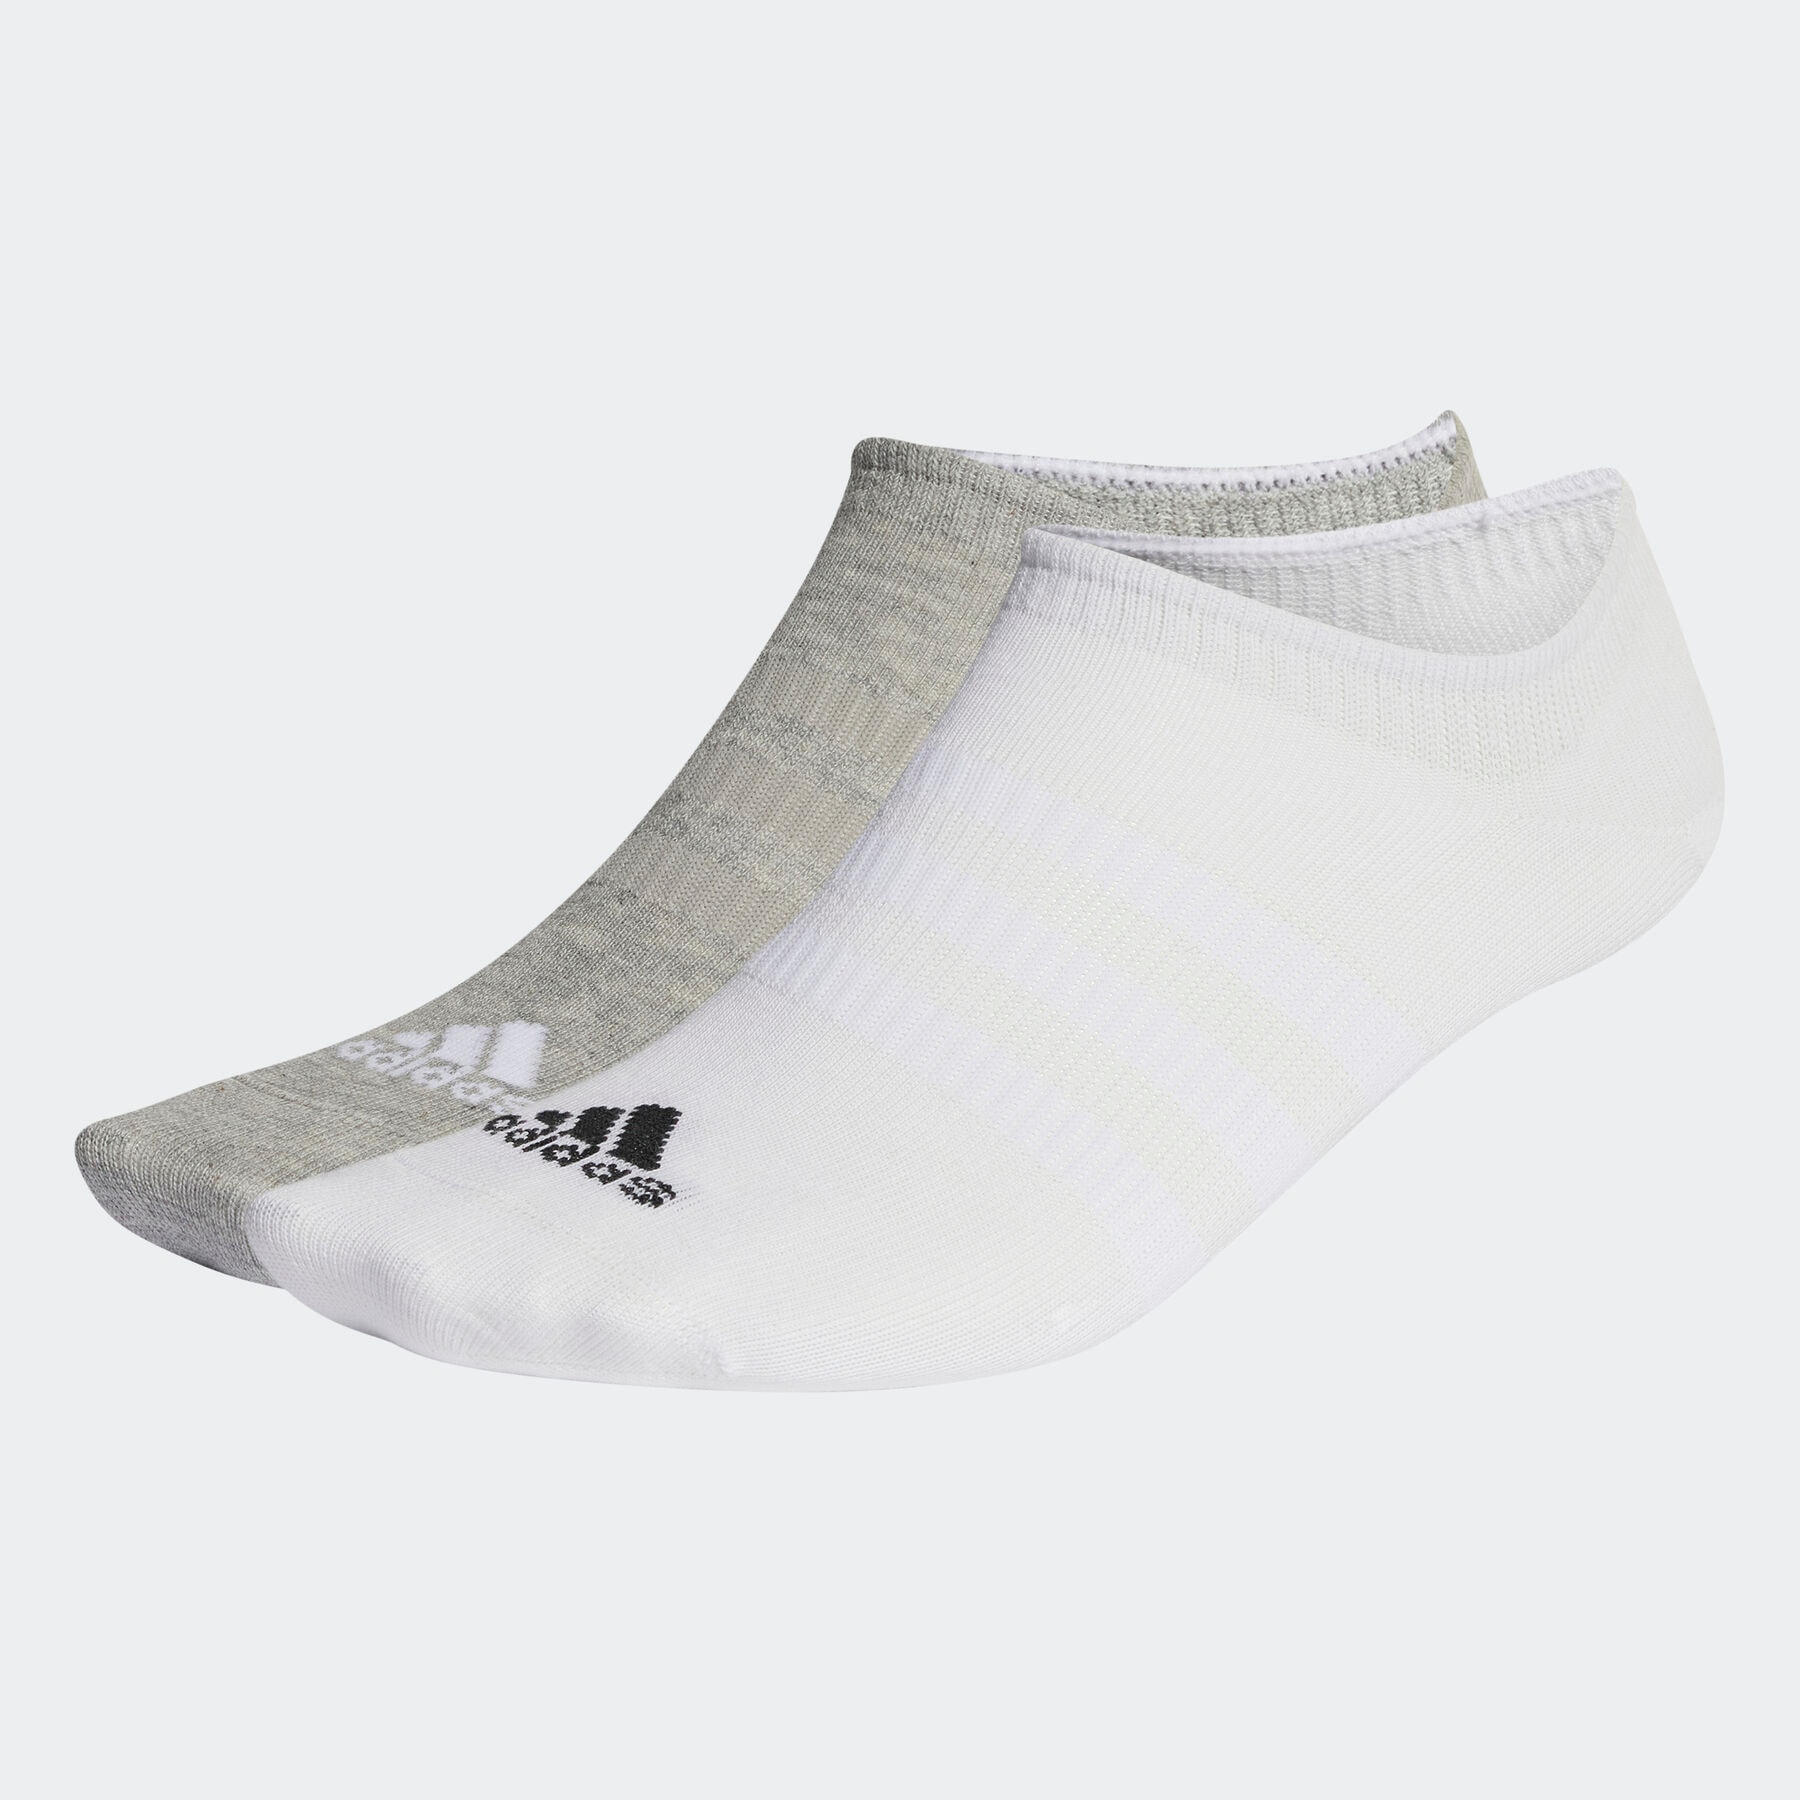 adidas Performance Funktionssocken »THIN AND LIGHT NOSHOW SOCKEN, 3 PAAR«, (3 Paar) von adidas performance